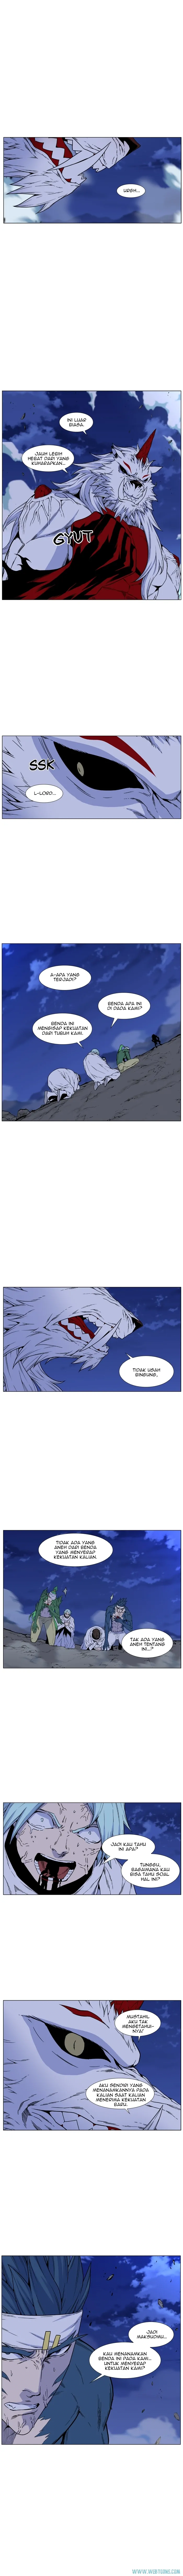 Noblesse Chapter 468 - 81